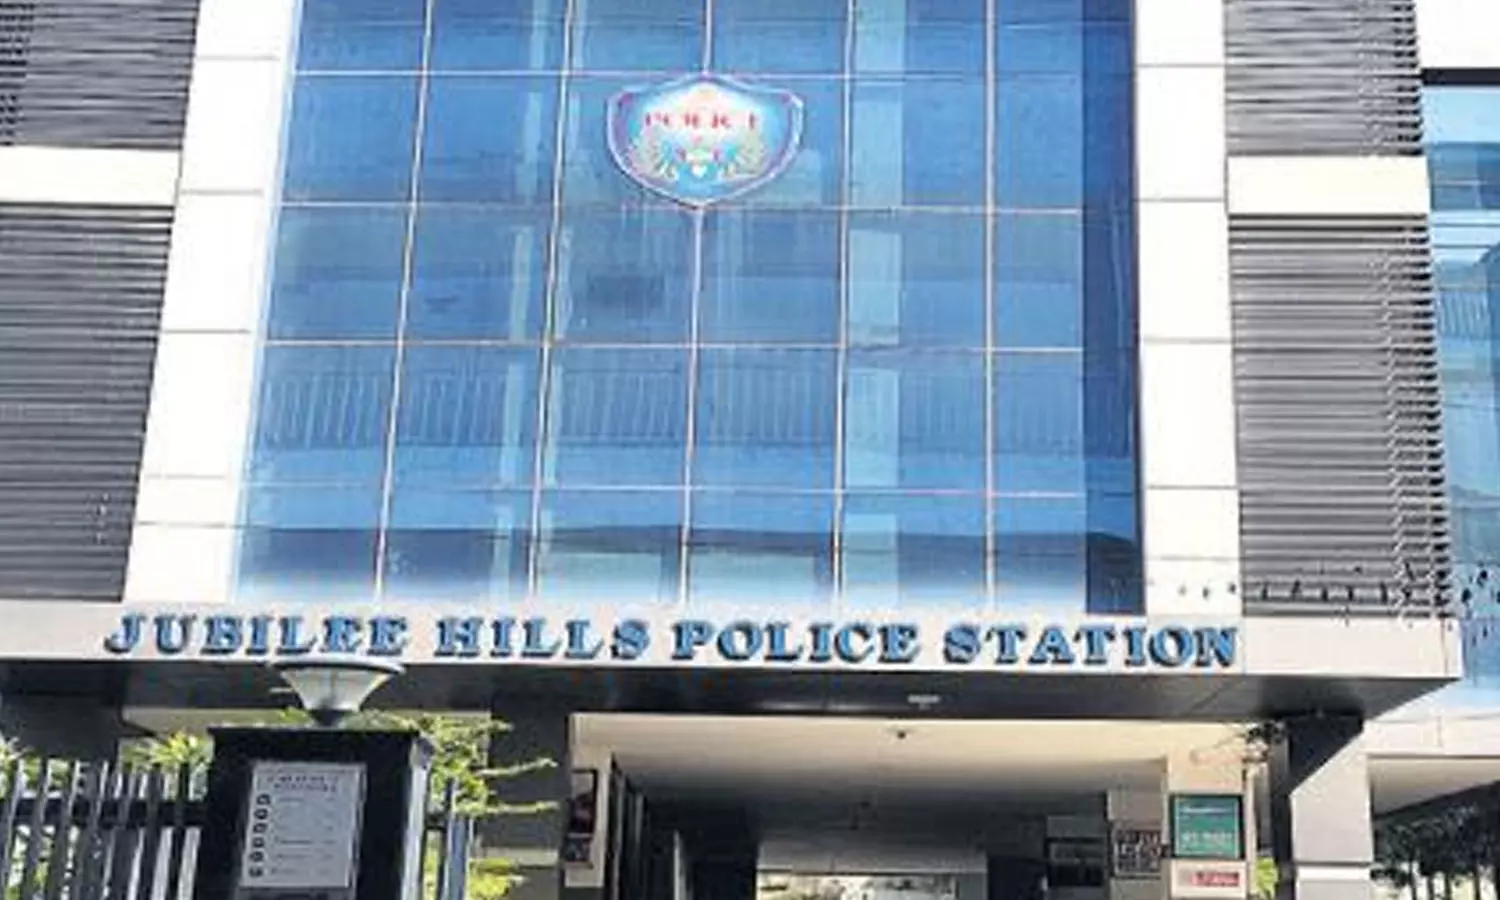 Land grabber booked for obstructing duties of police in Jubilee Hills police station